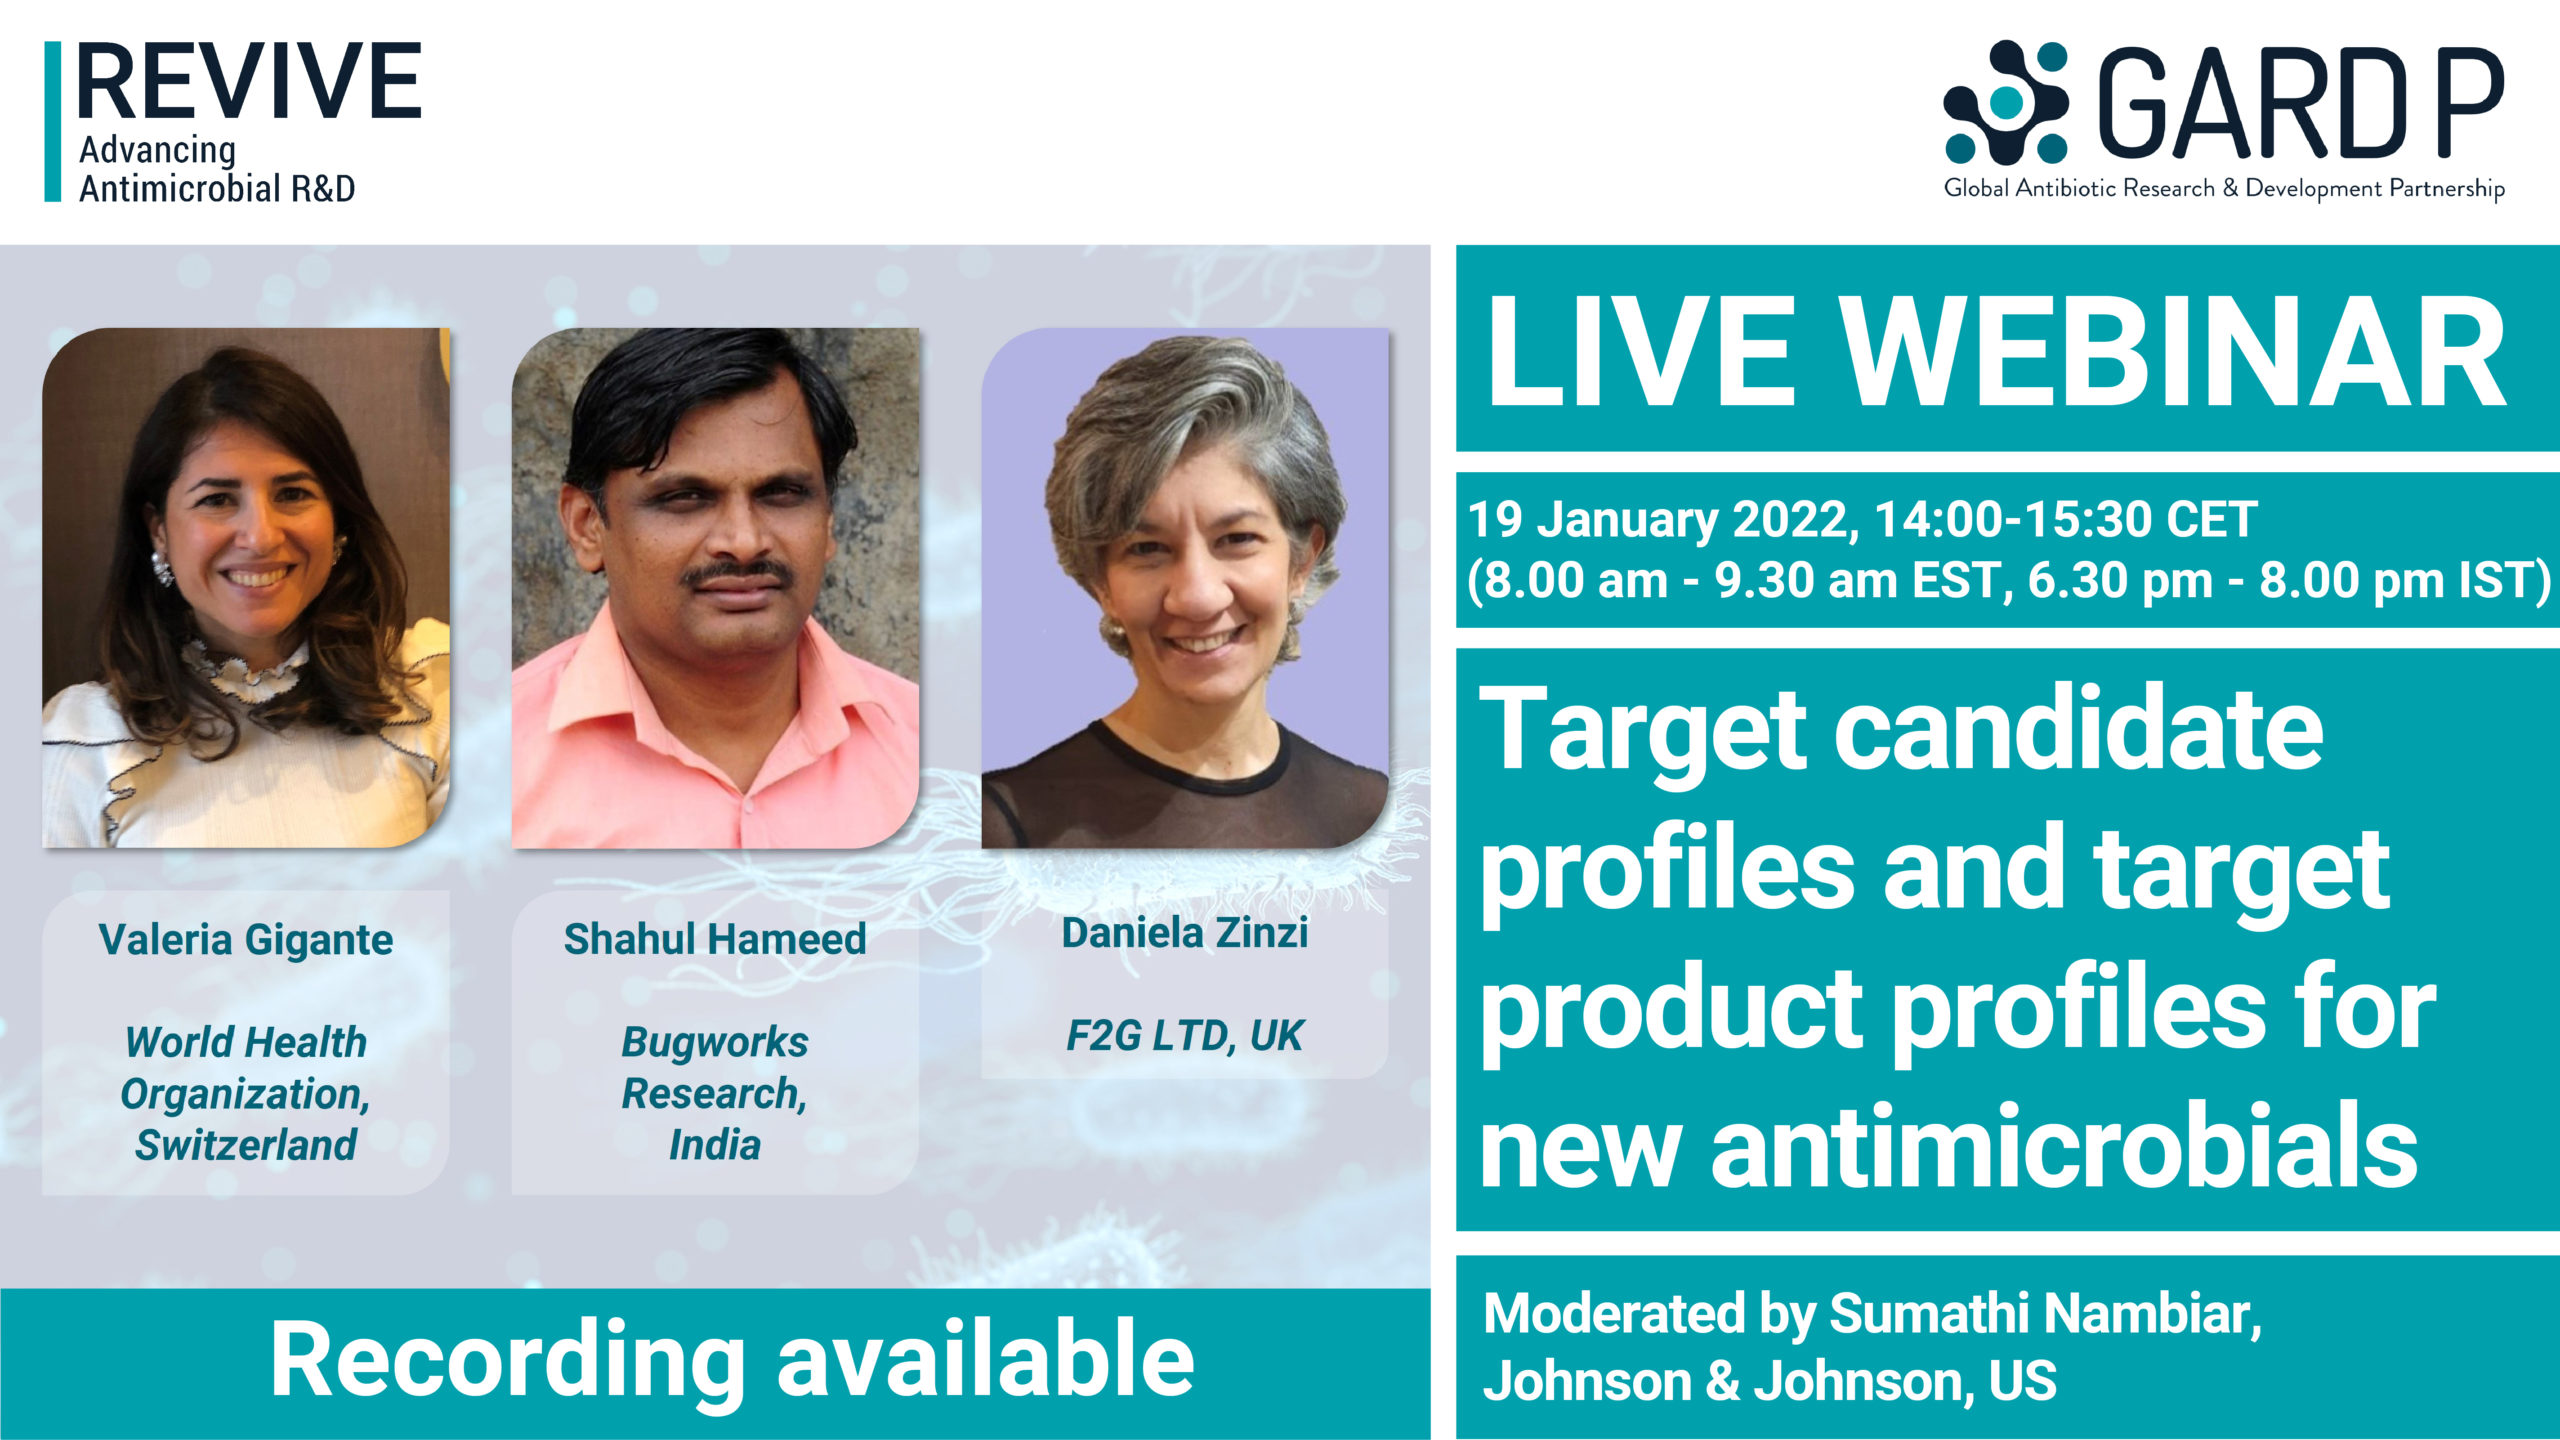 Target candidate profiles and target product profiles for new antimicrobials